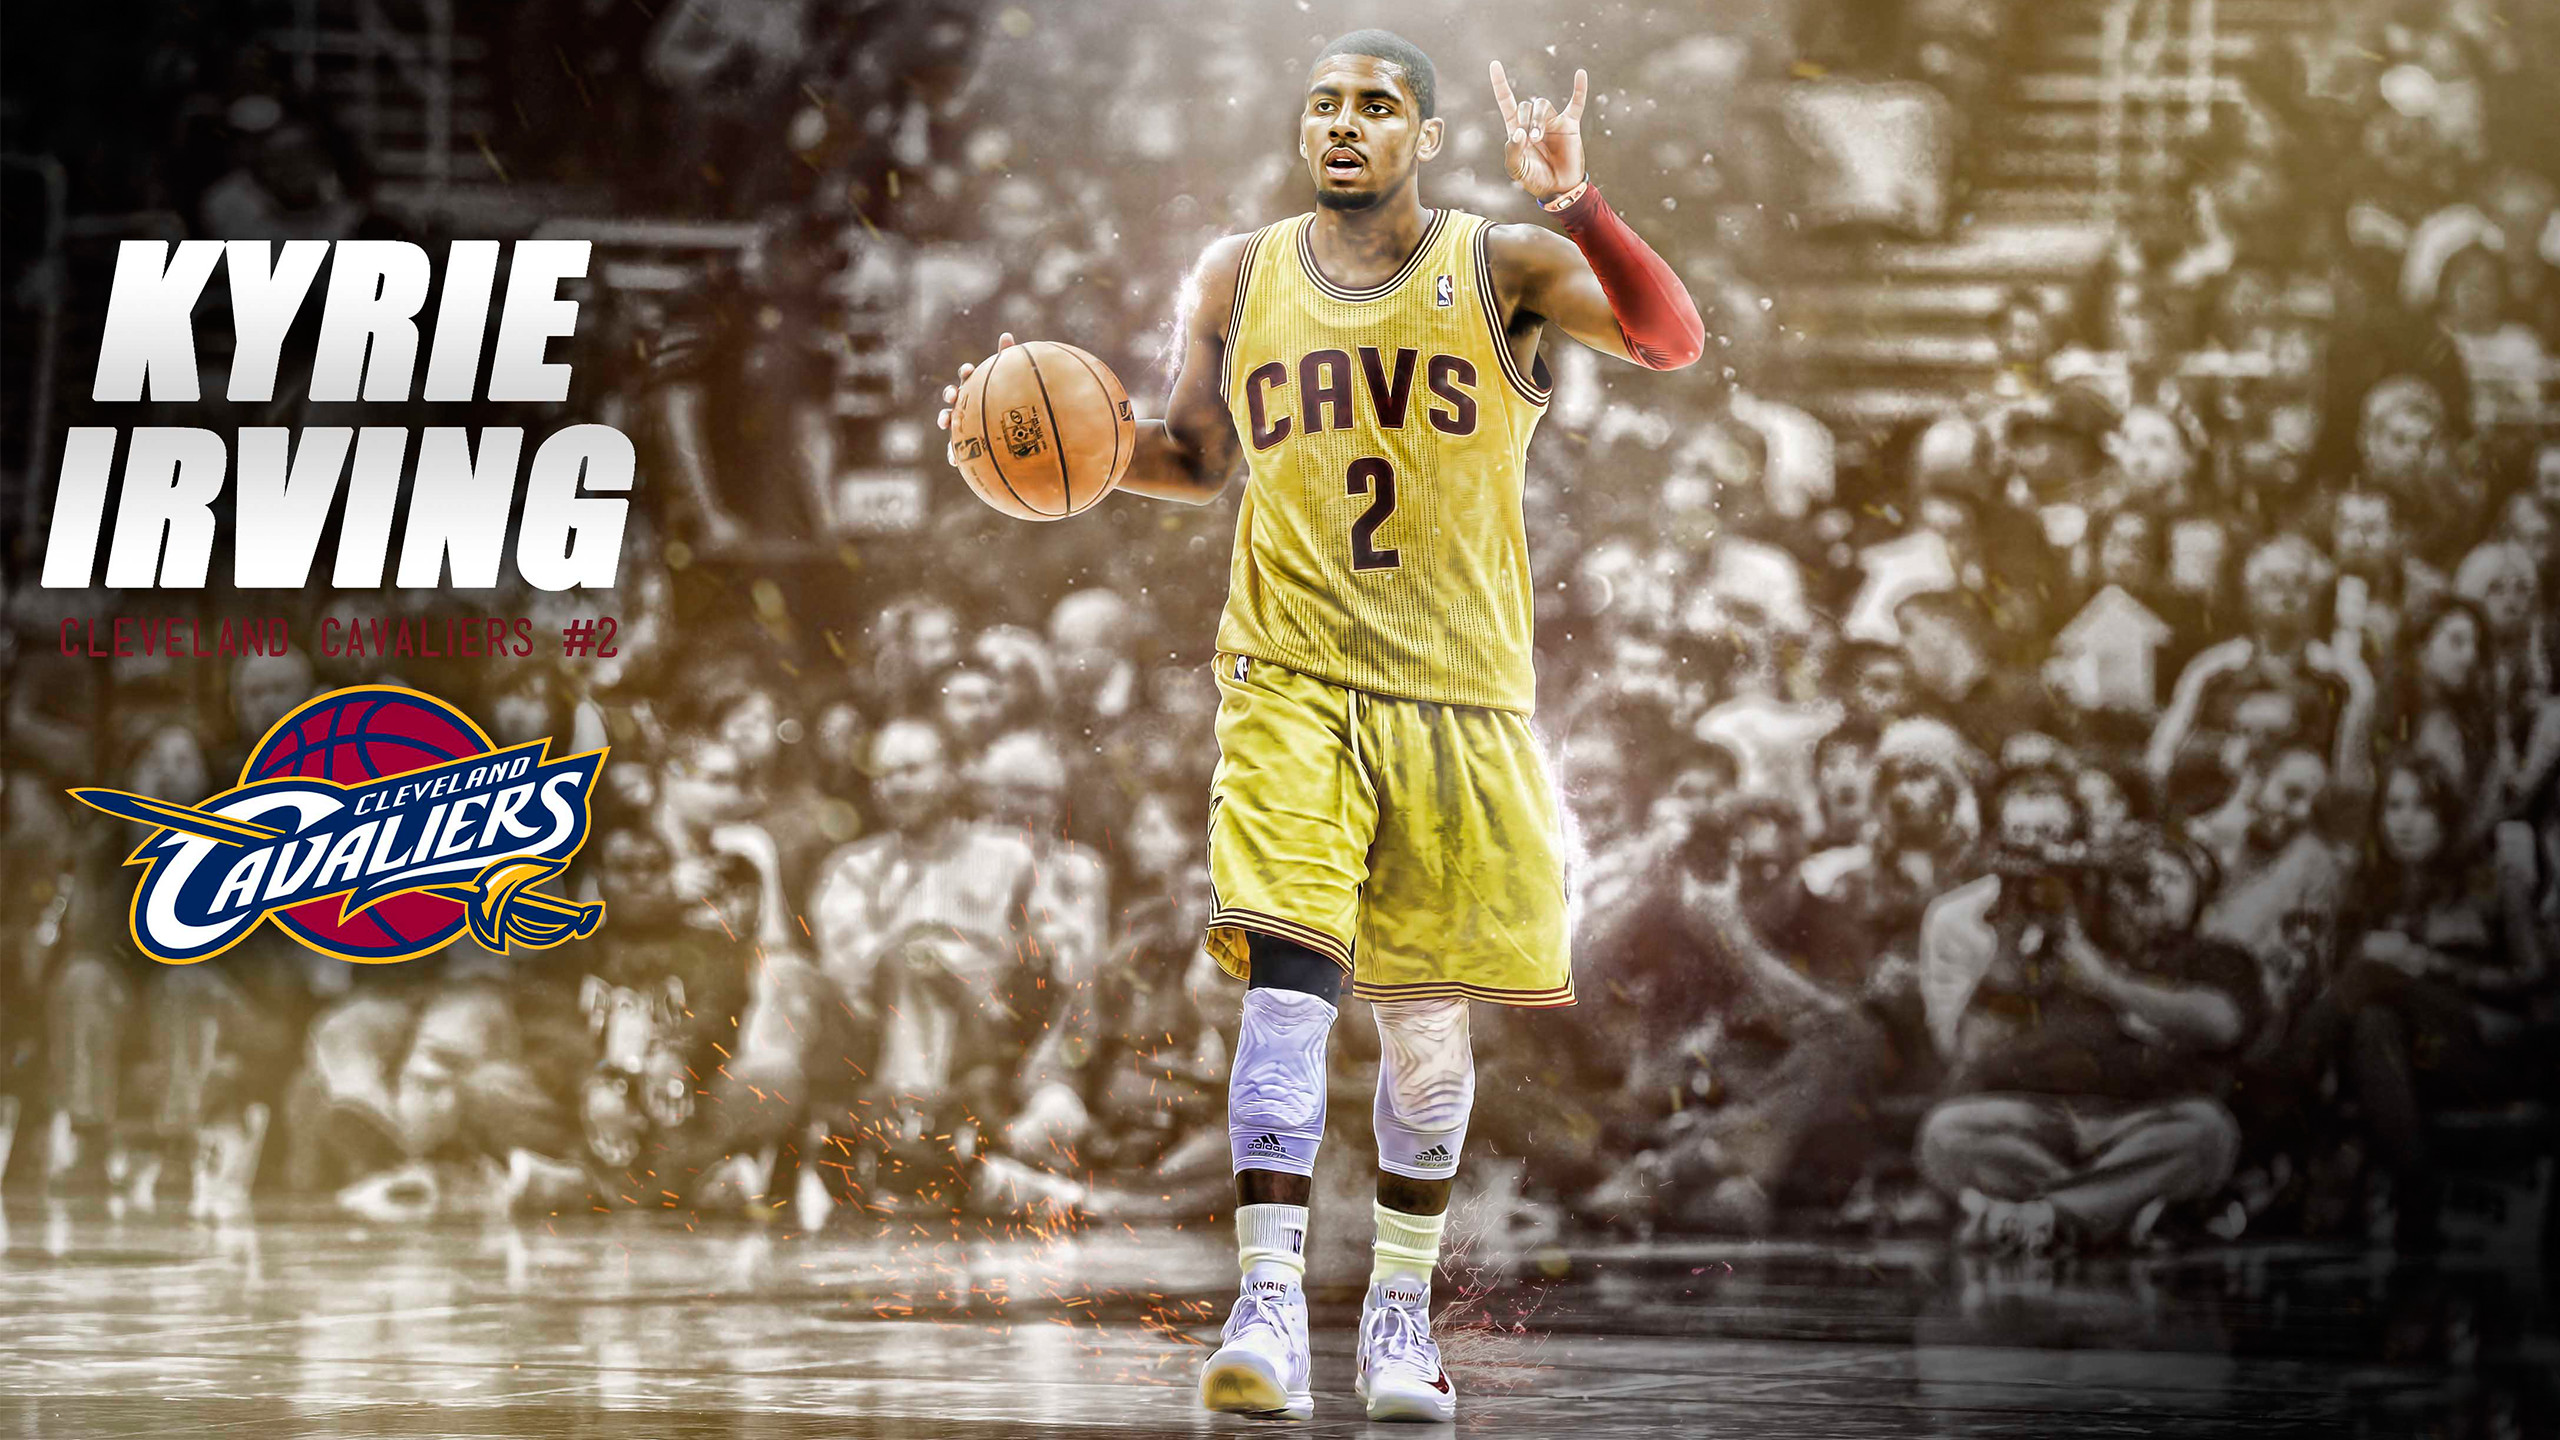 2560x1440 Kyrie Irving